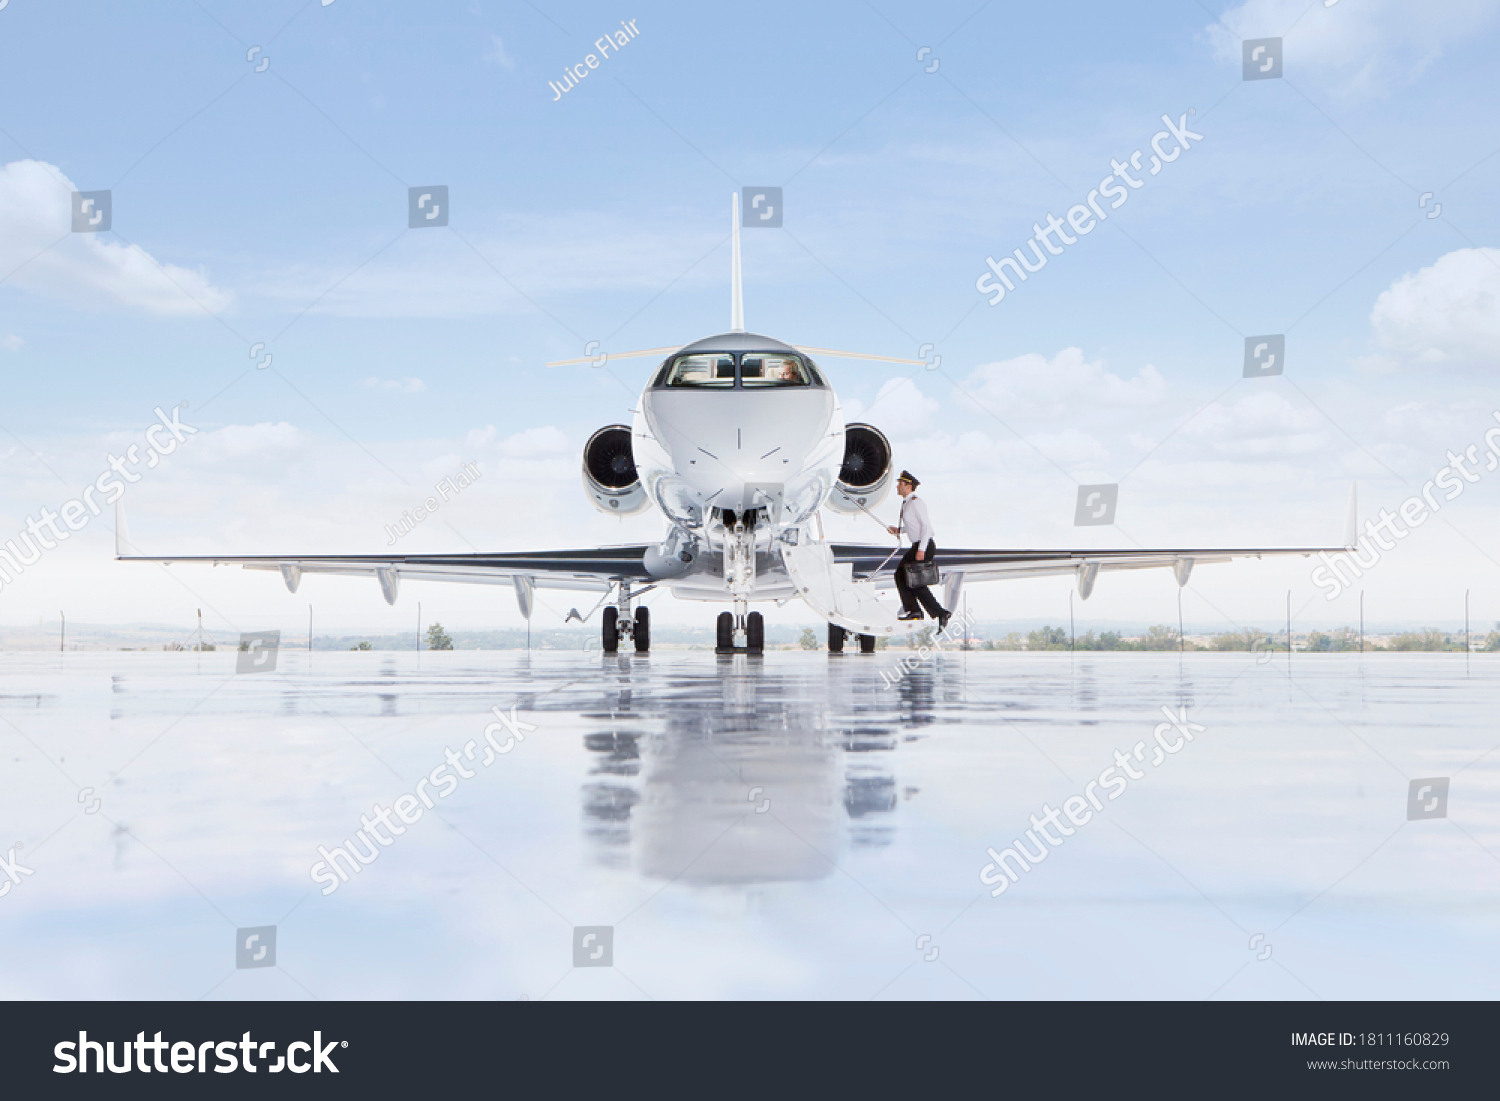 A wide shot of pilot boarding a private jet on a runway. #1811160829